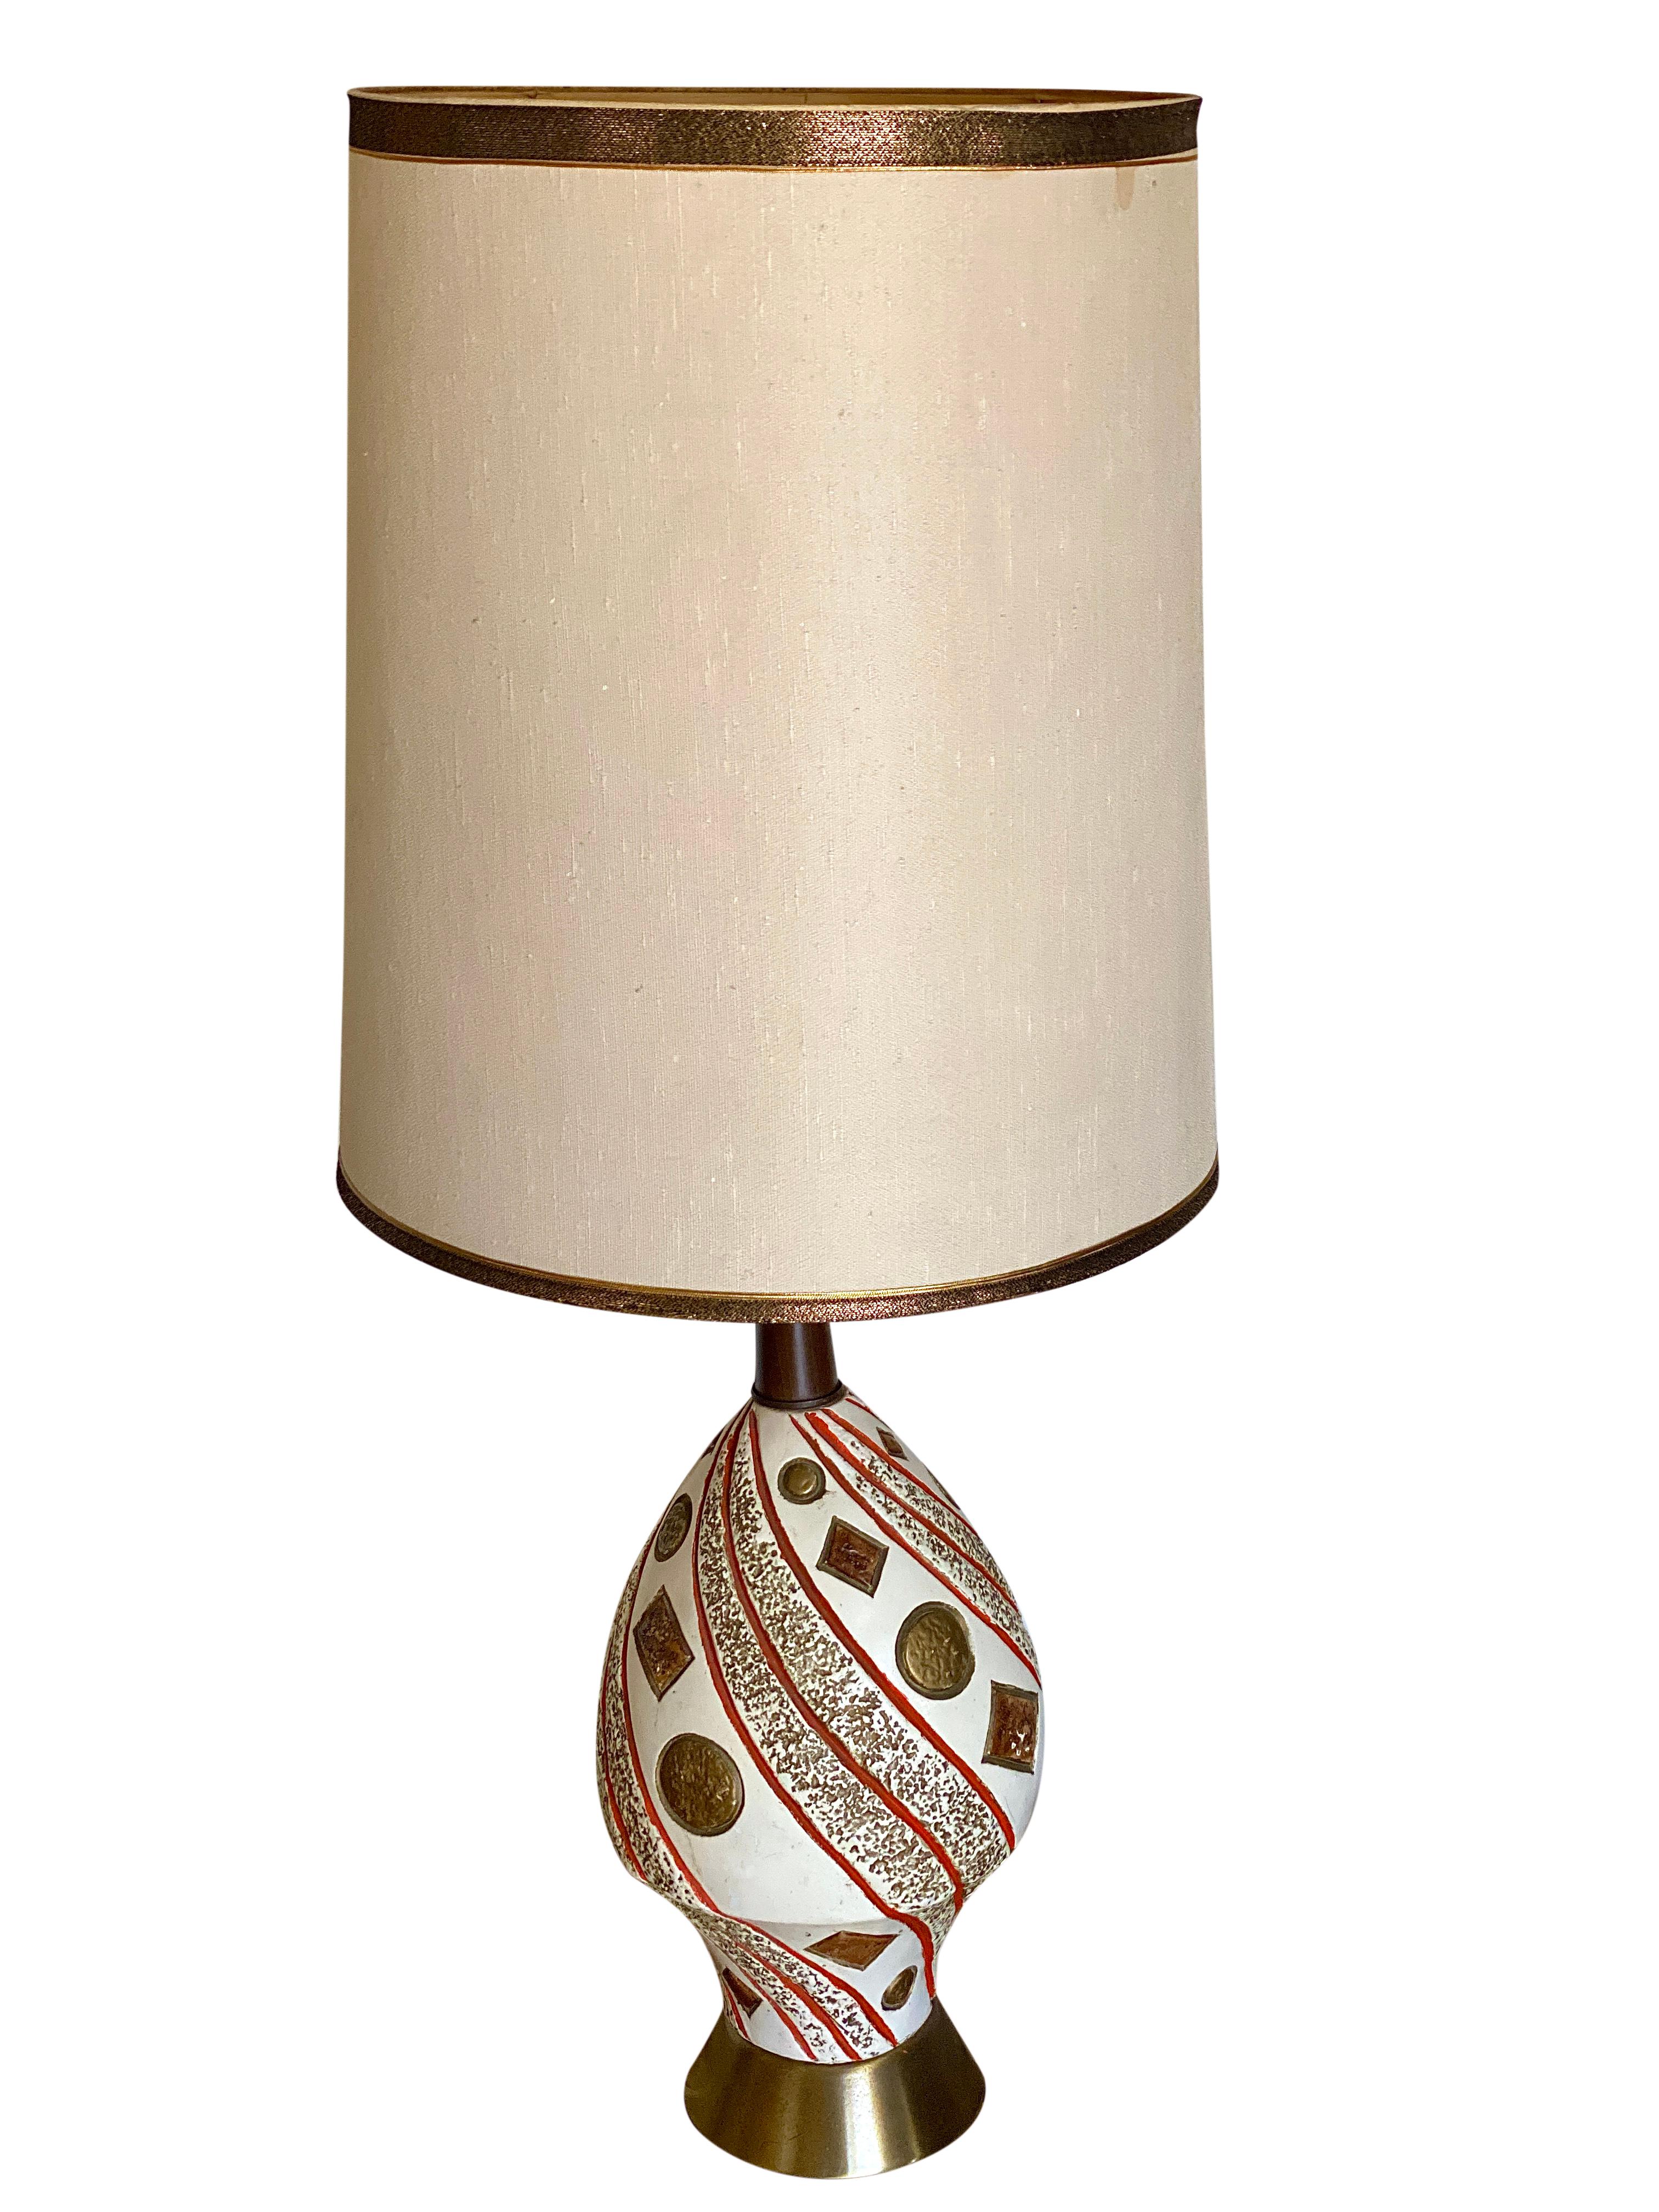 Abstract orange and cream ceramic Mid-Century Modern lamp with brass base and teak neck. The gold in the pottery is luminescent. Makes a bold statement with subtle colors that blend with any interior. The lampshade is no longer available because of